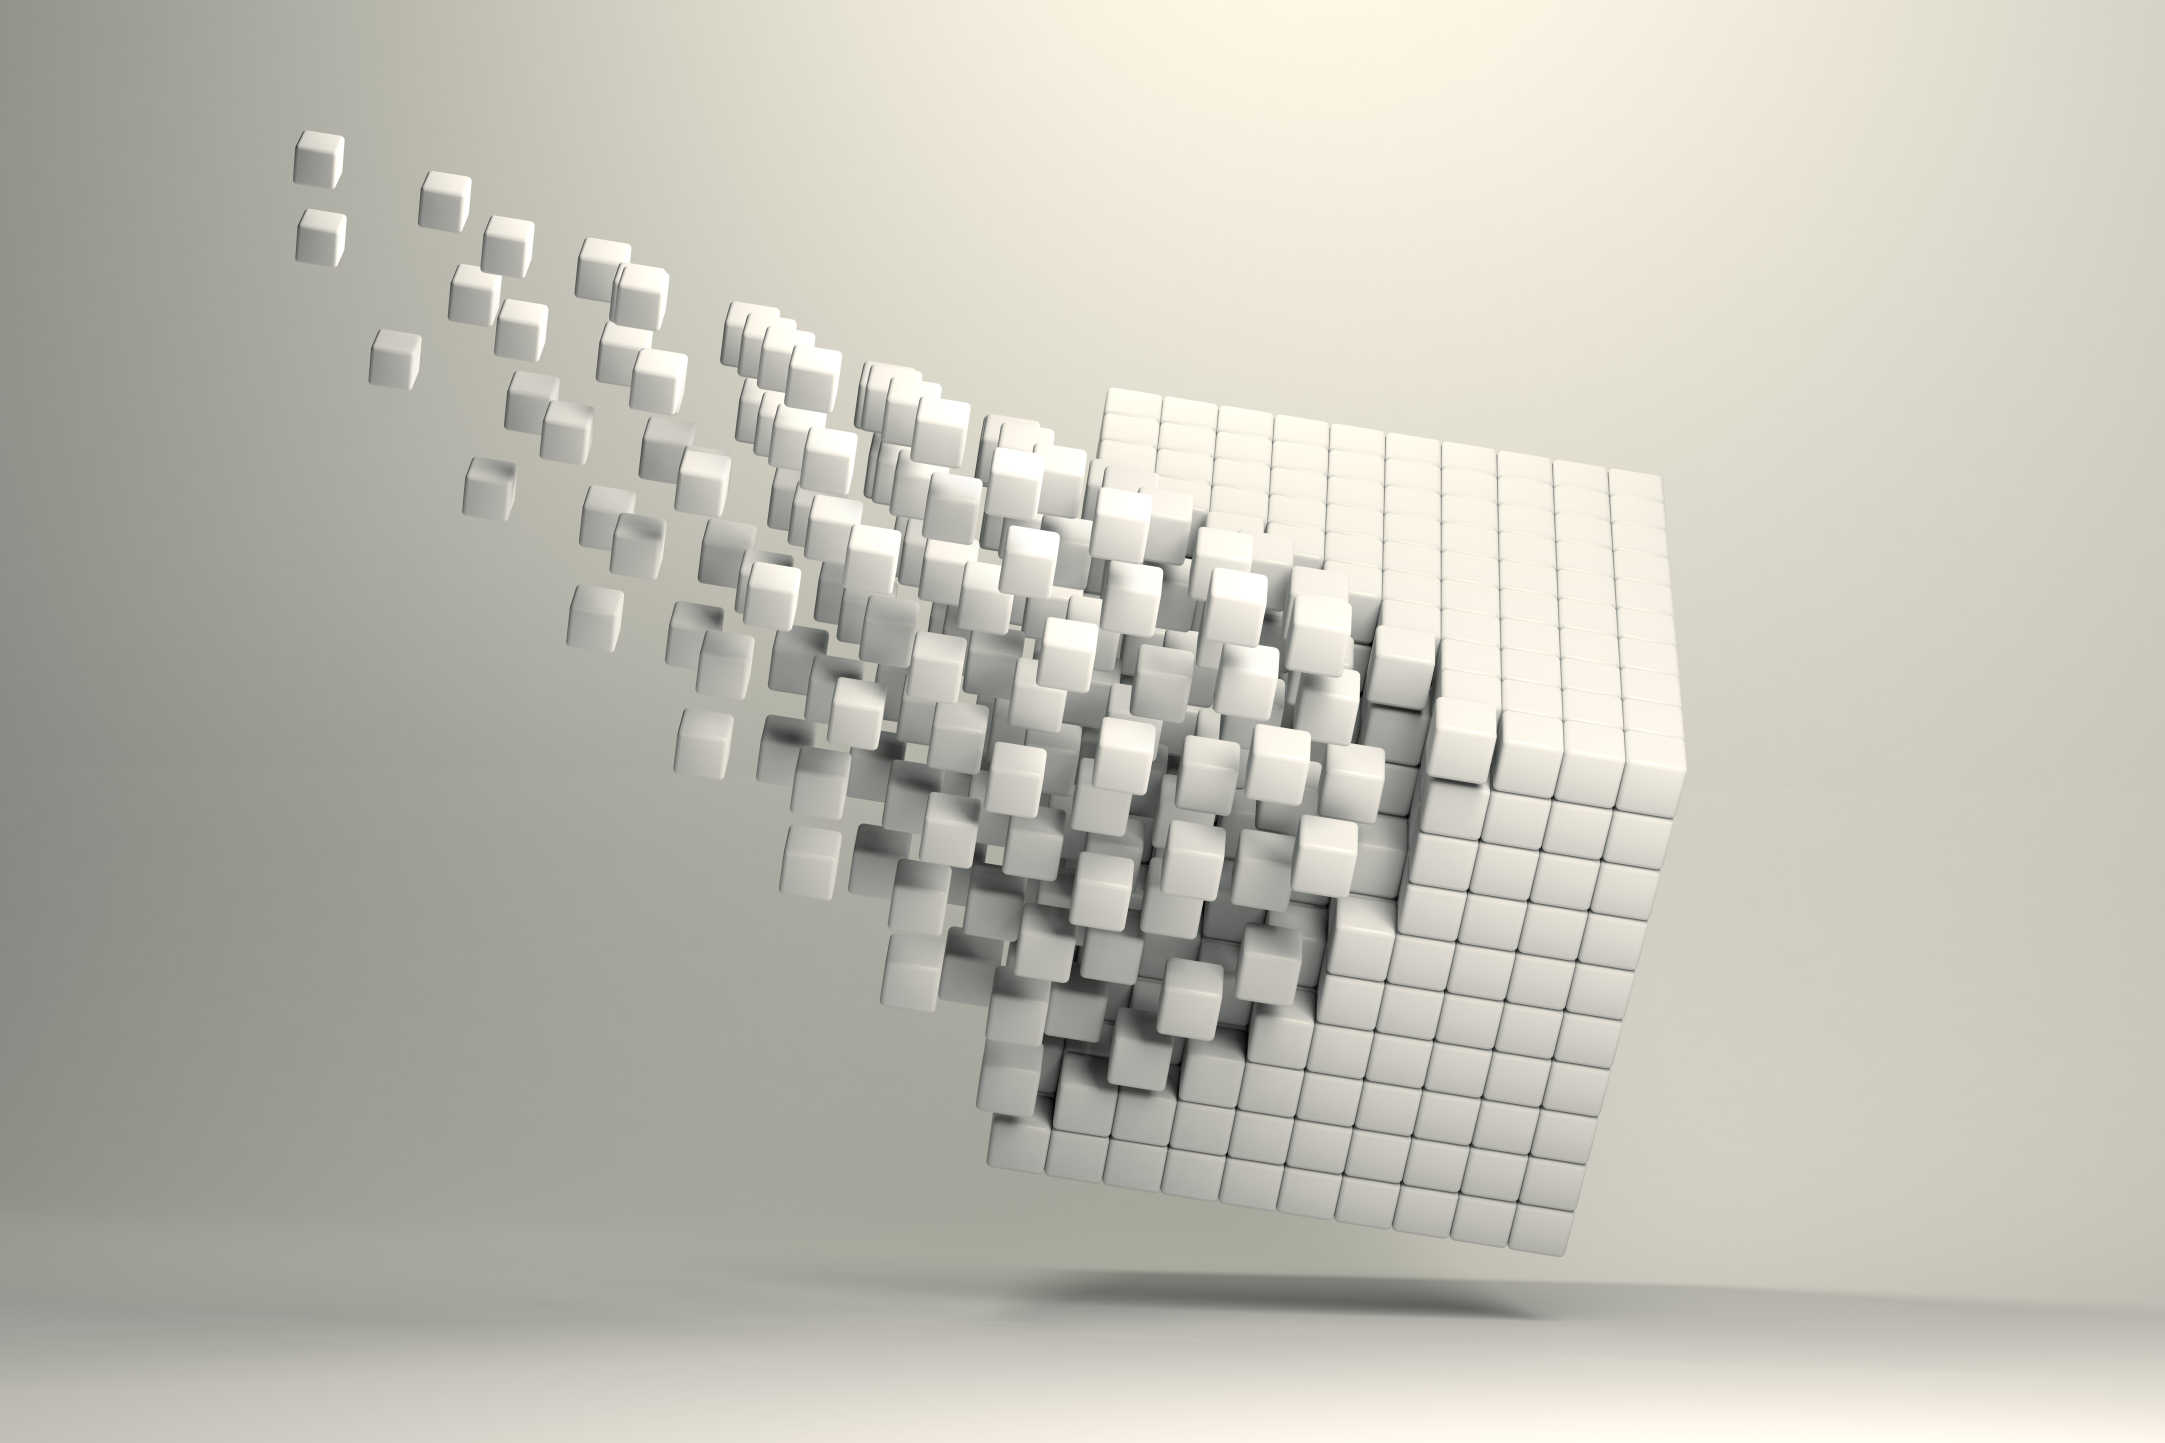 A 3-D cube breaking into smaller cubes to represent a unified data strategy